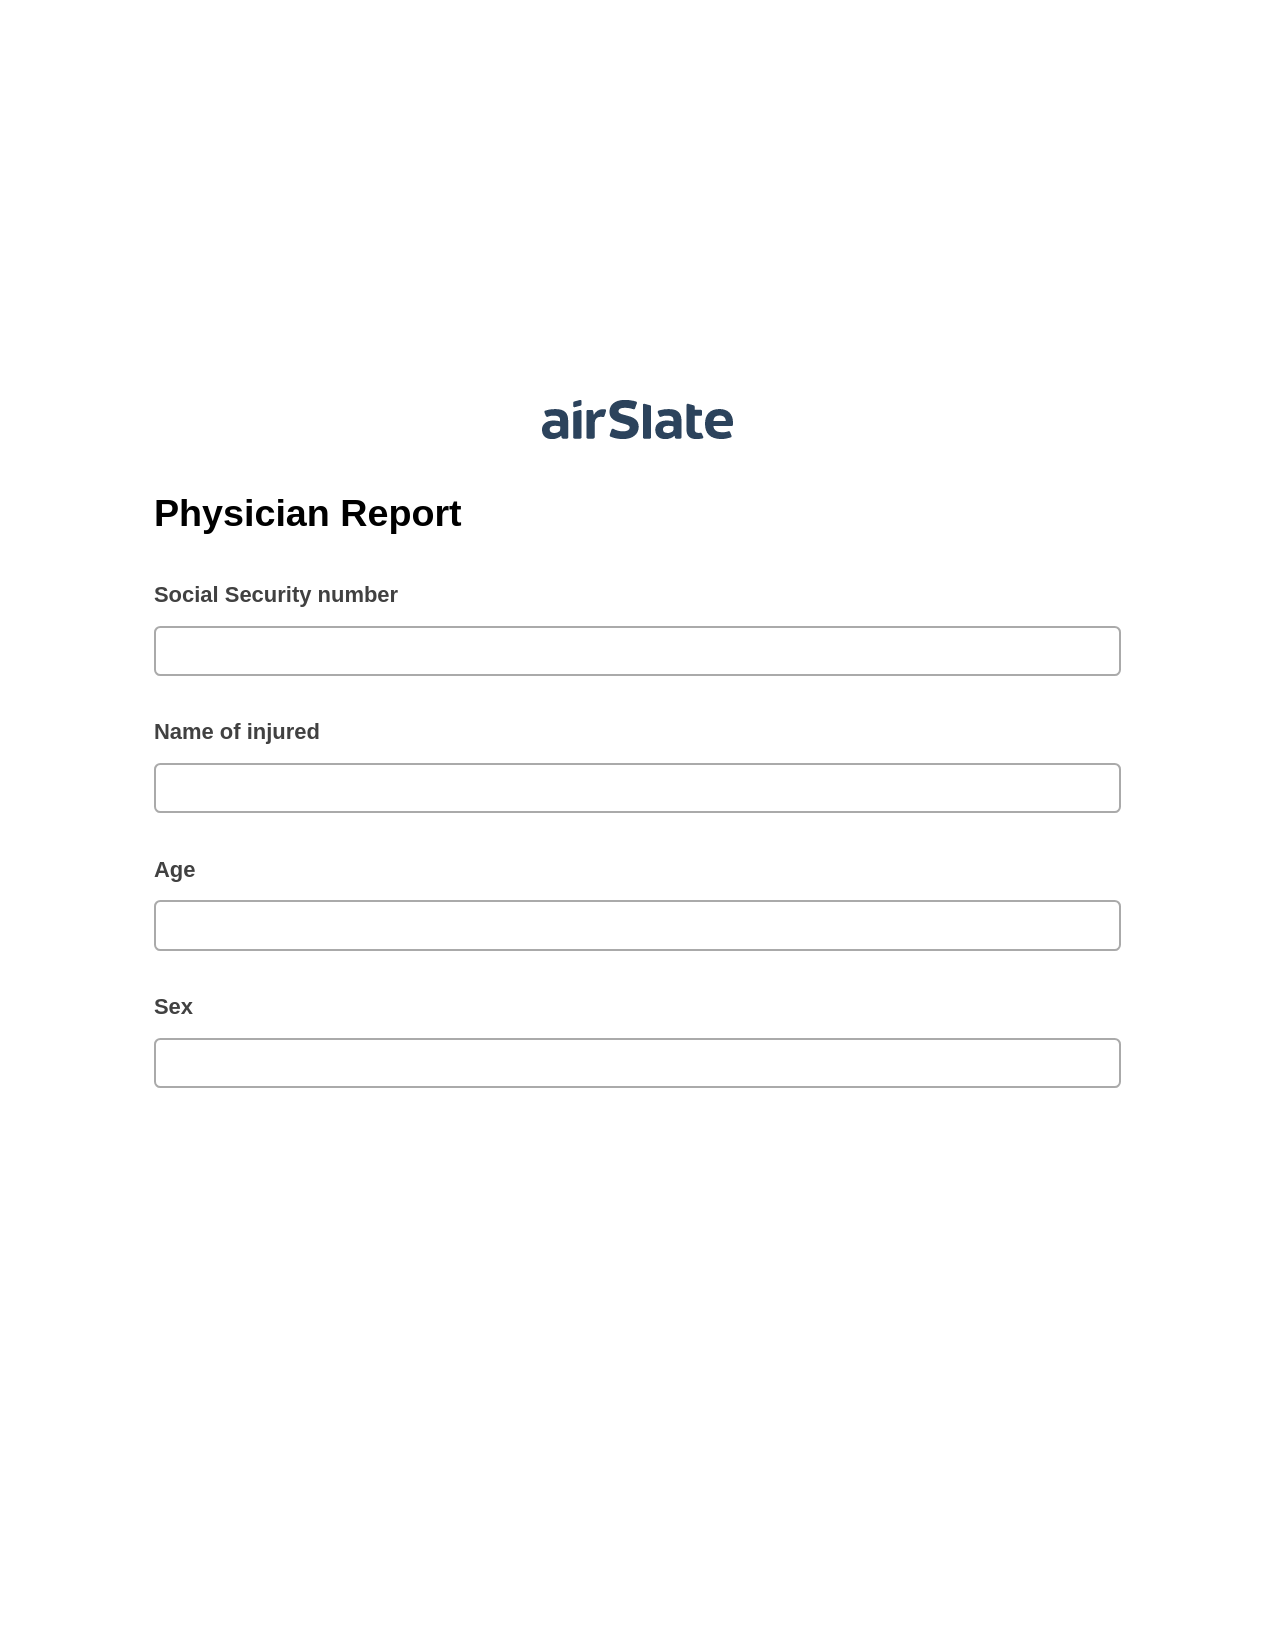 Physician Report Pre-fill from MS Dynamics 365 Records, Create slate addon, Archive to Google Drive Bot